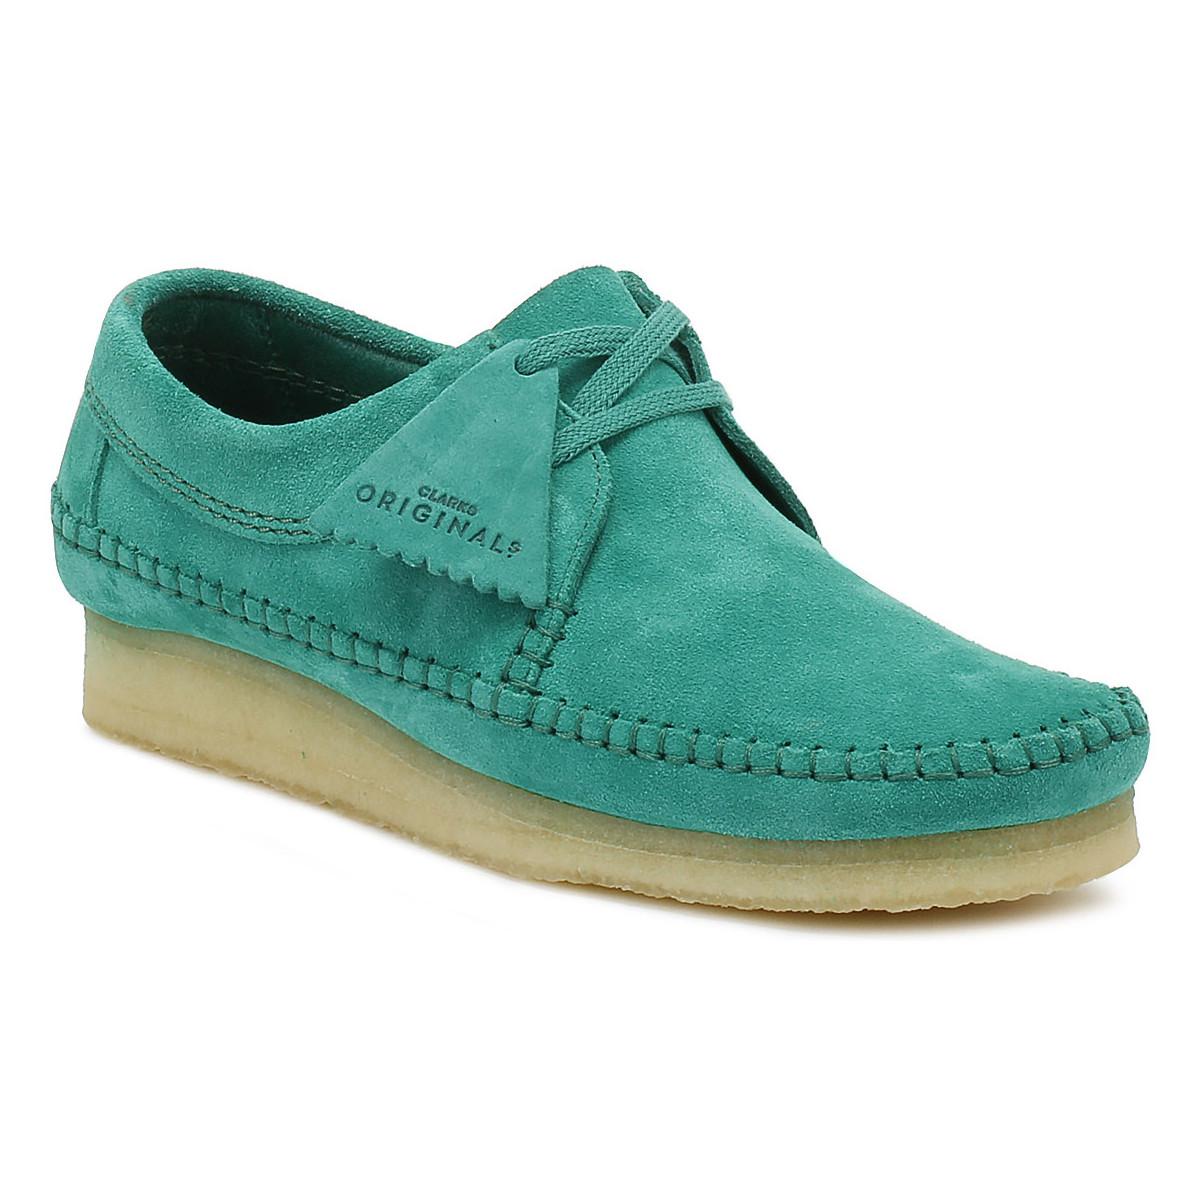 clarks green shoes